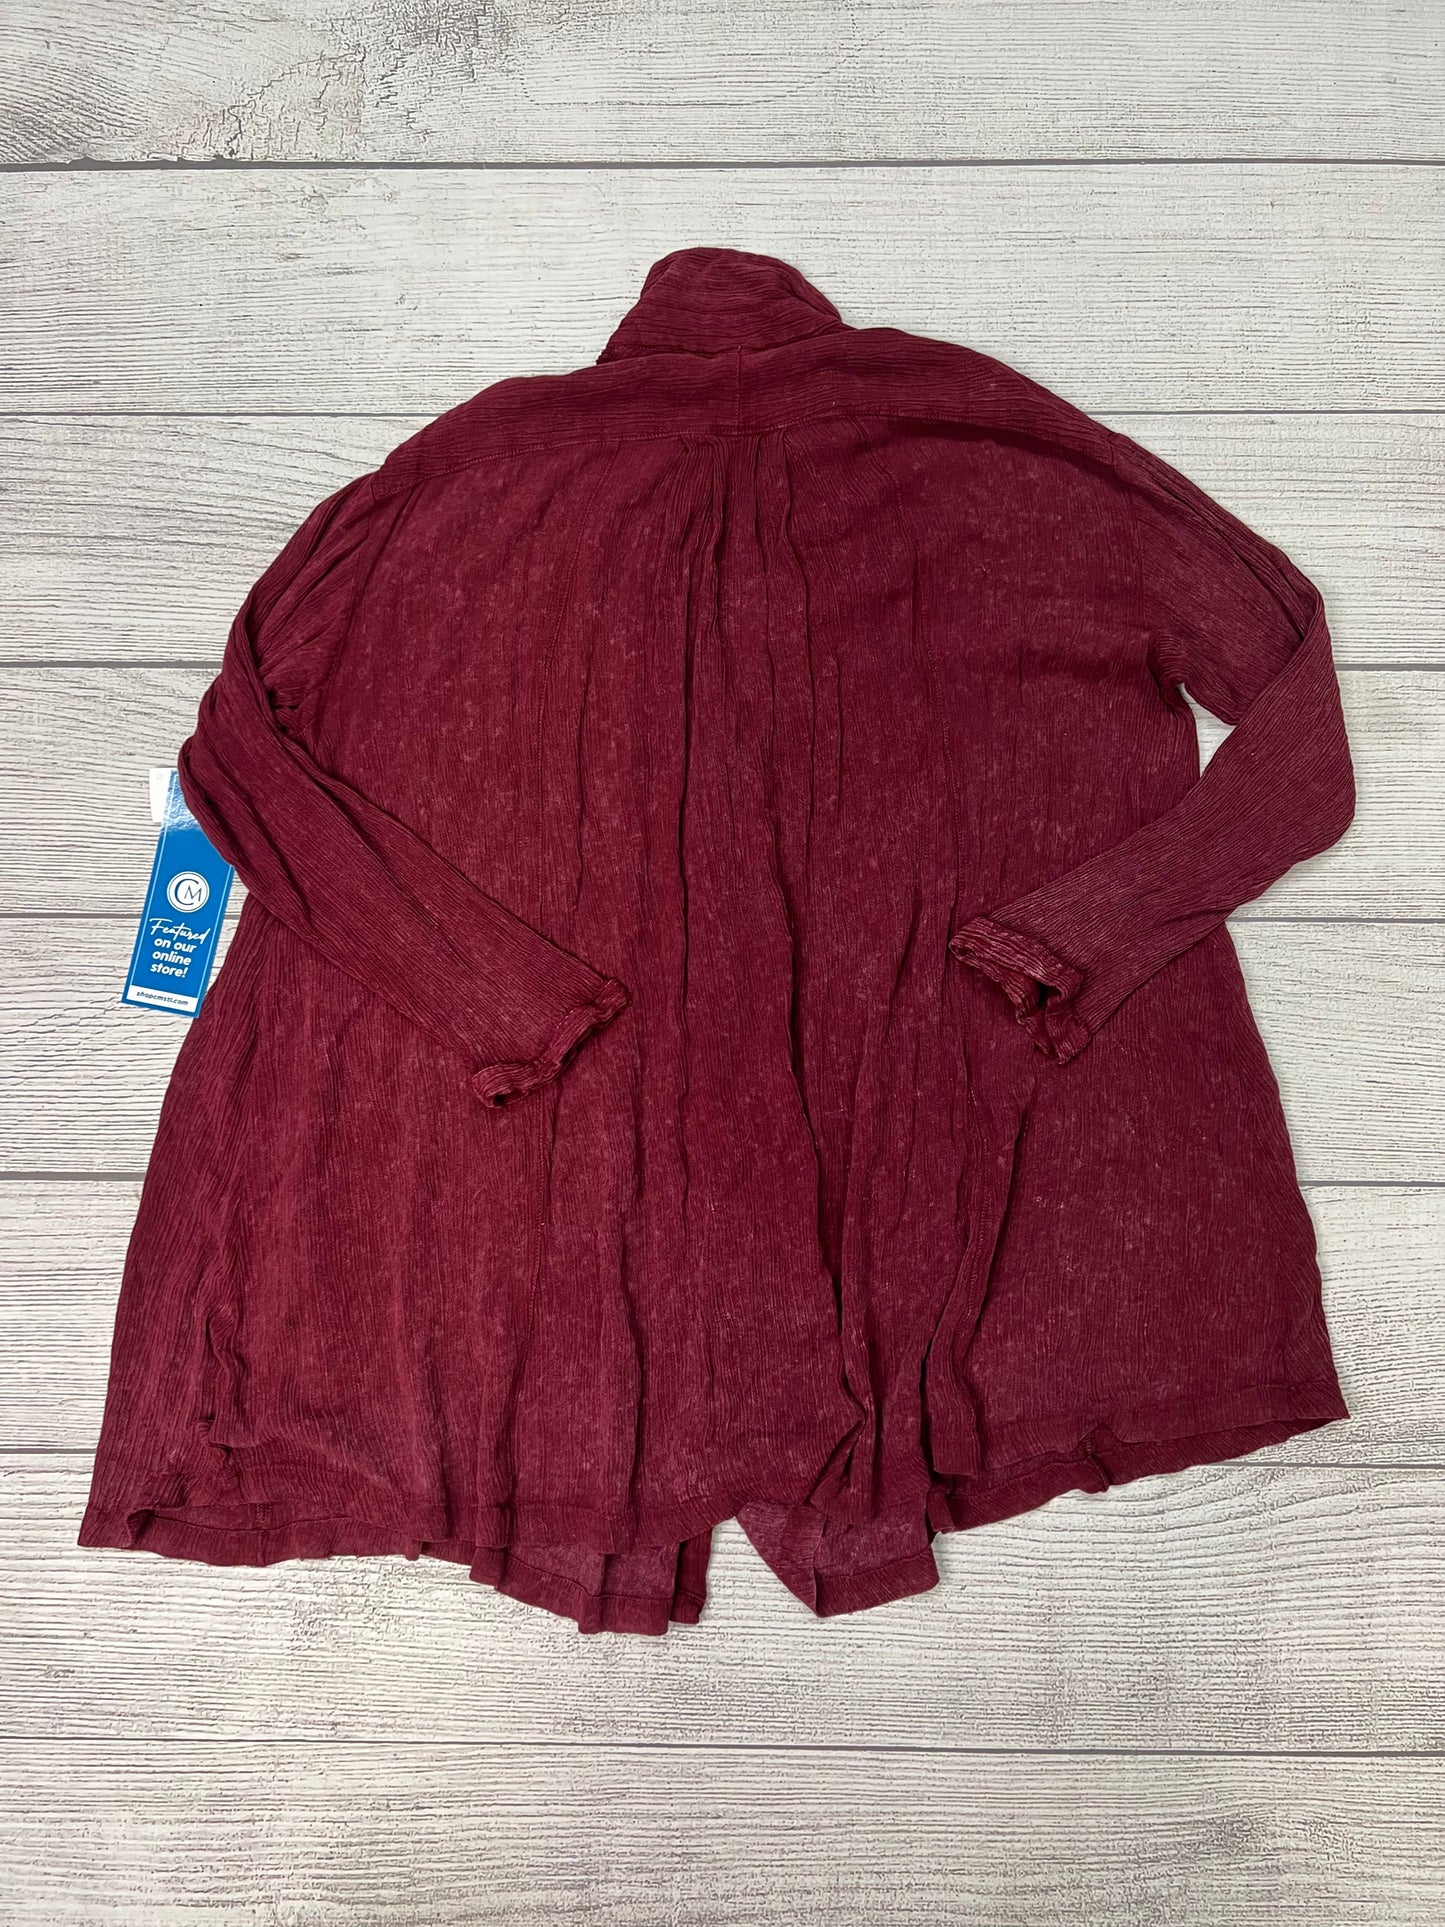 Maroon Blouse Long Sleeve Free People, Size Petite   Small